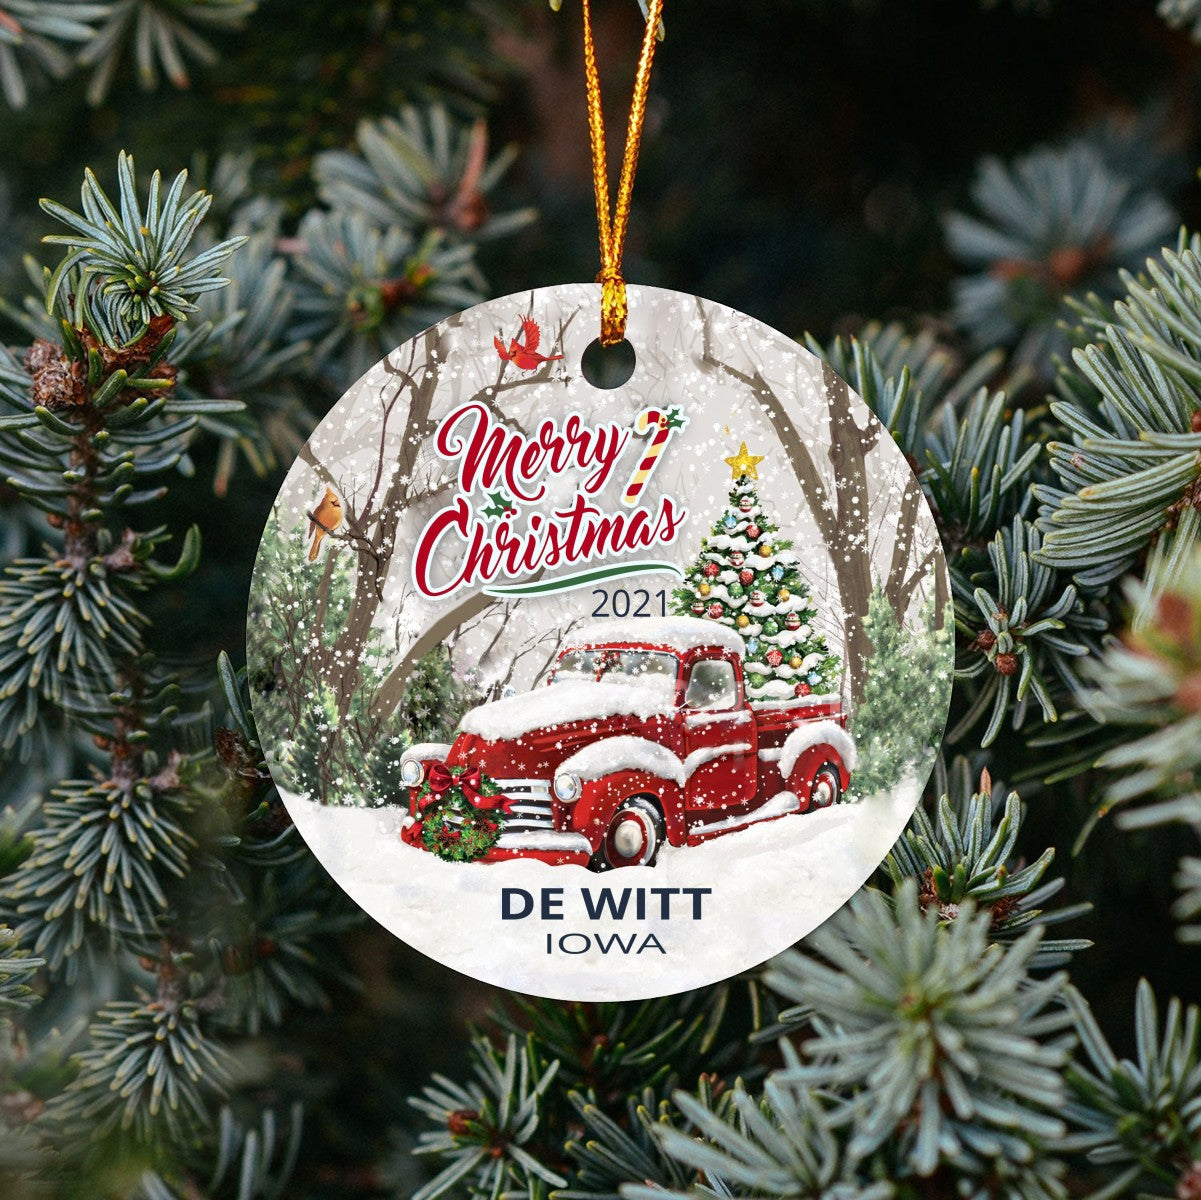 Christmas Tree Ornaments De Witt - Ornament With Name City, State De Witt Iowa IA Ornament - Red Truck Xmas Ornaments 3'' Plastic Gift For Family, Friend And Housewarming